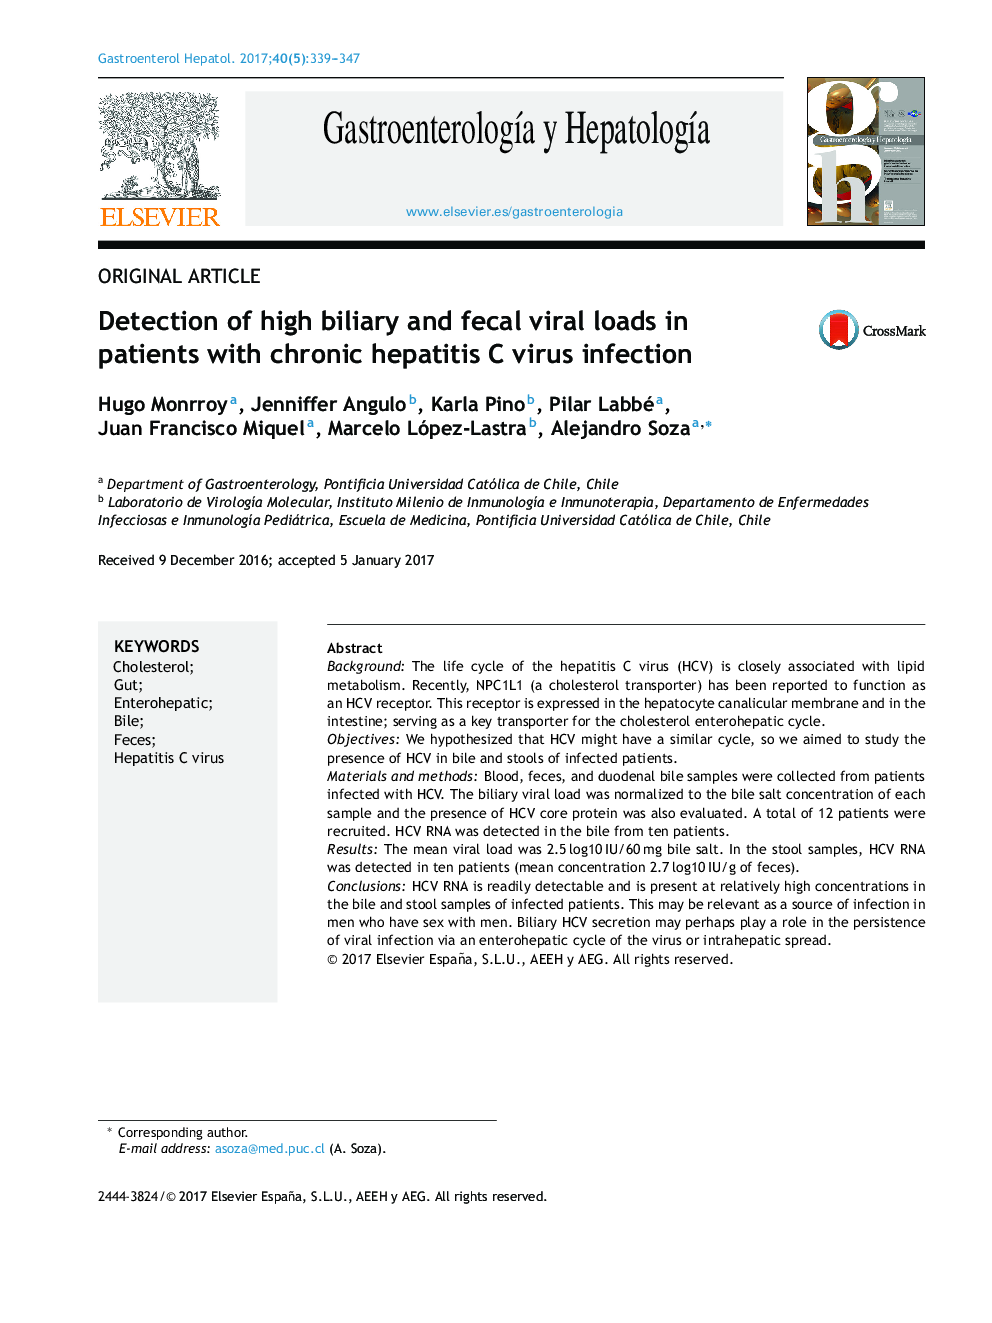 Detection of high biliary and fecal viral loads in patients with chronic hepatitis C virus infection